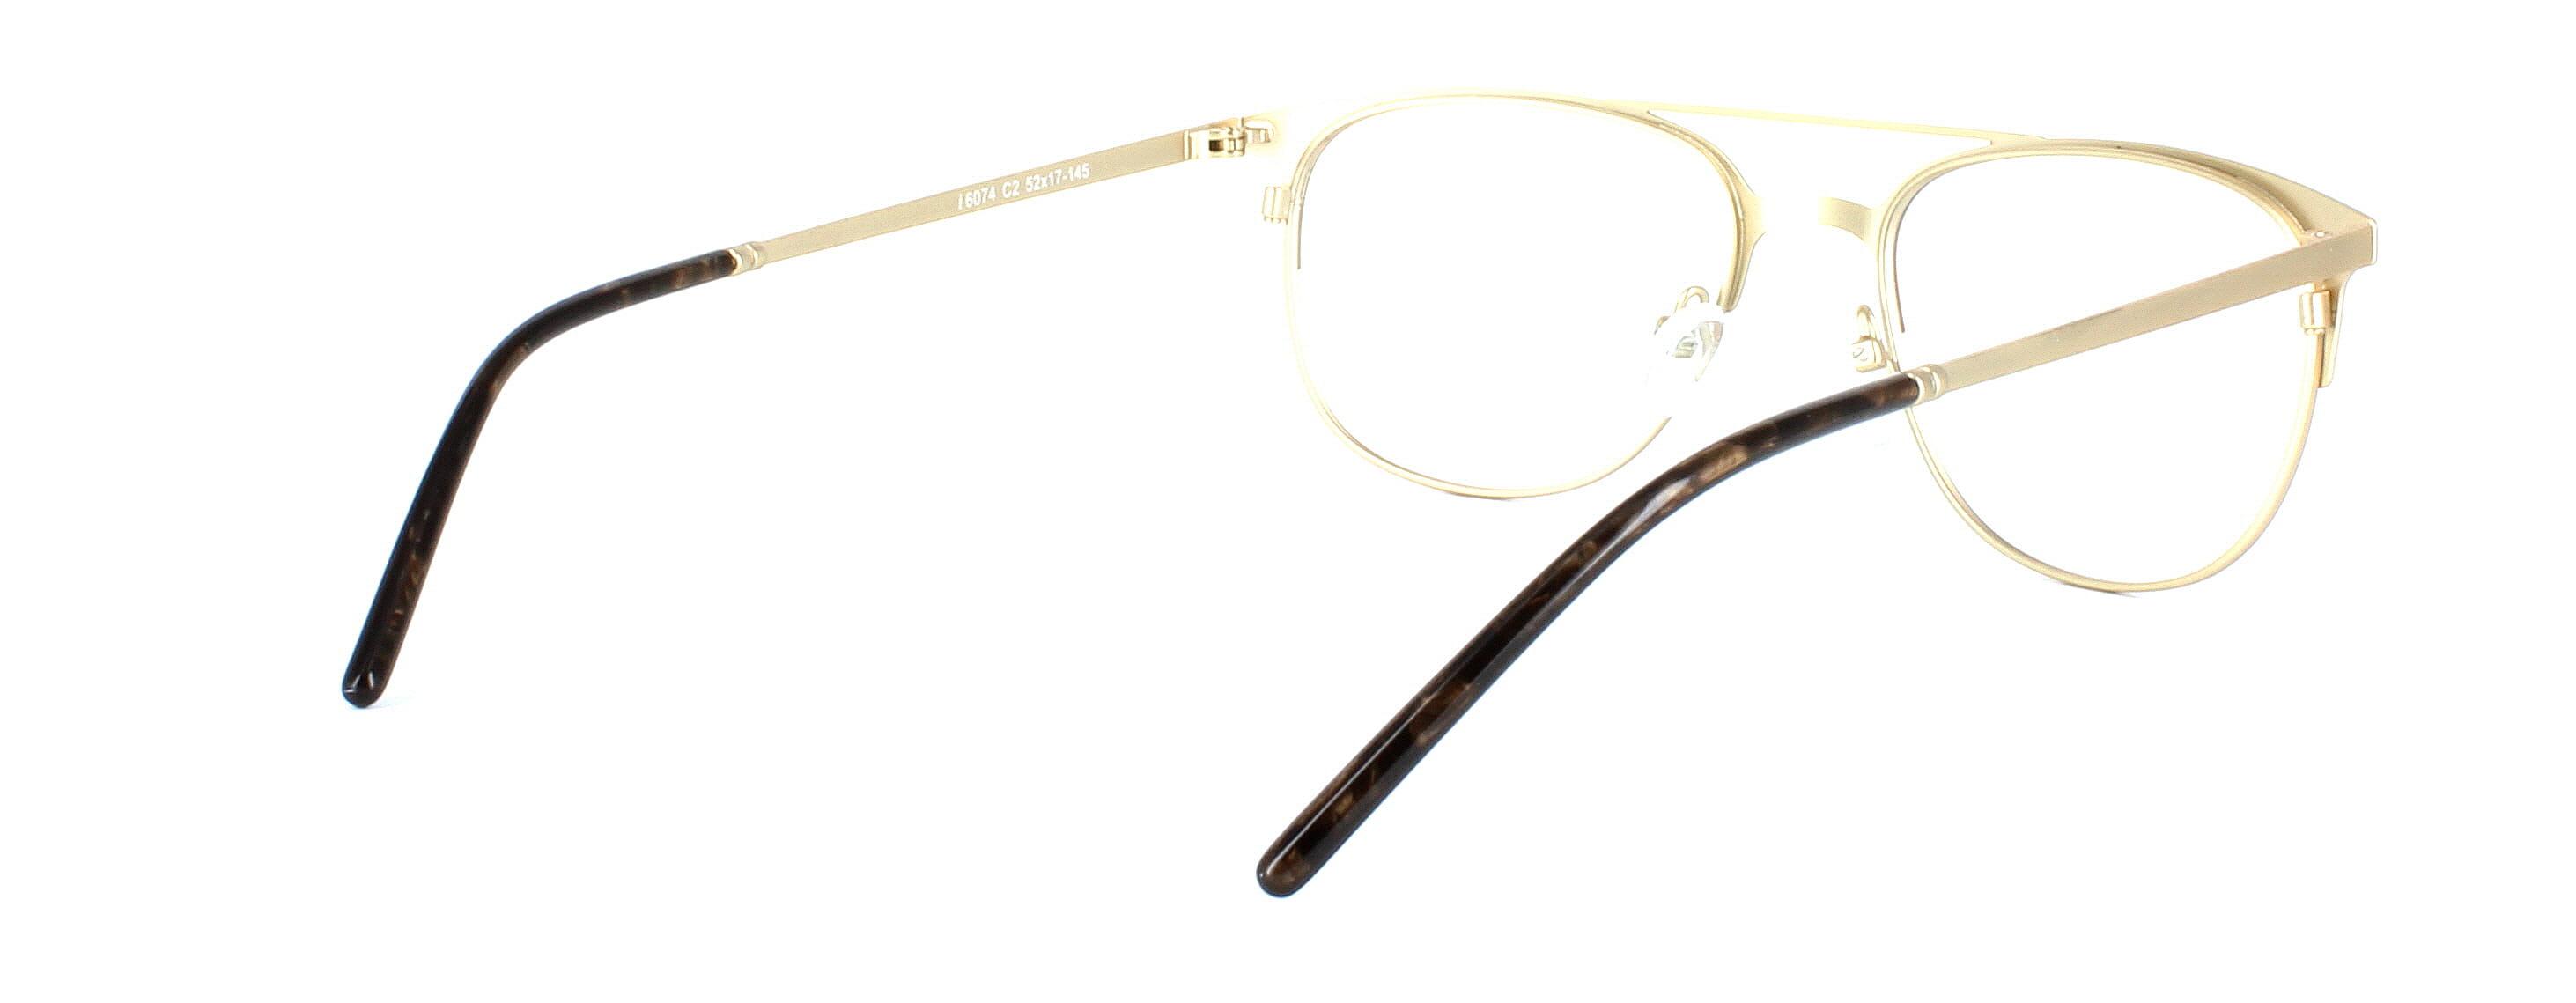 Nyton - Ladies full rim metal glasses in brown and gold - image view 4